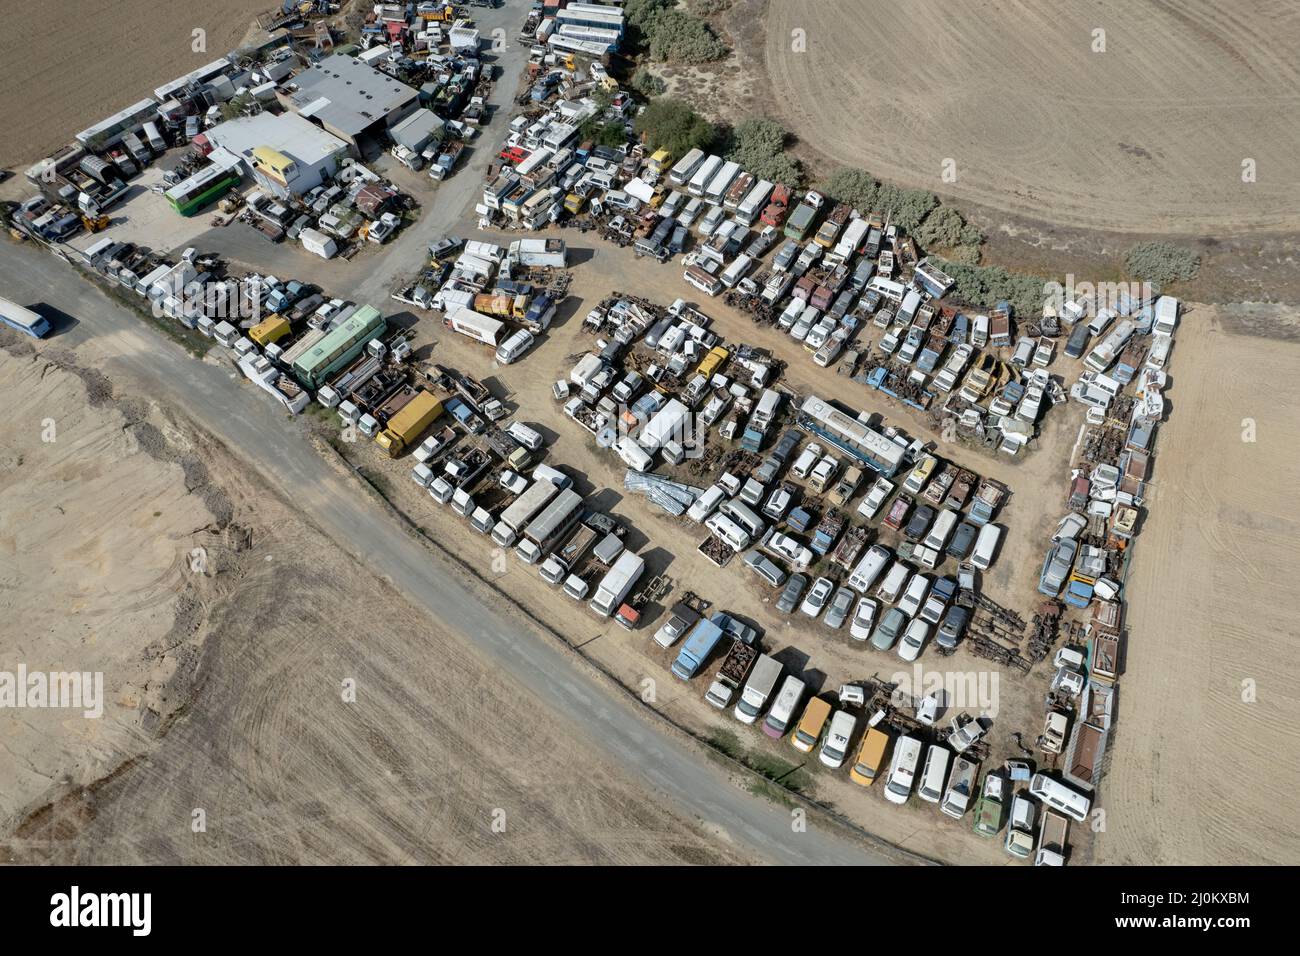 Aerial drone top view of smashed destroyed car wrecks on car junkyard. Stock Photo